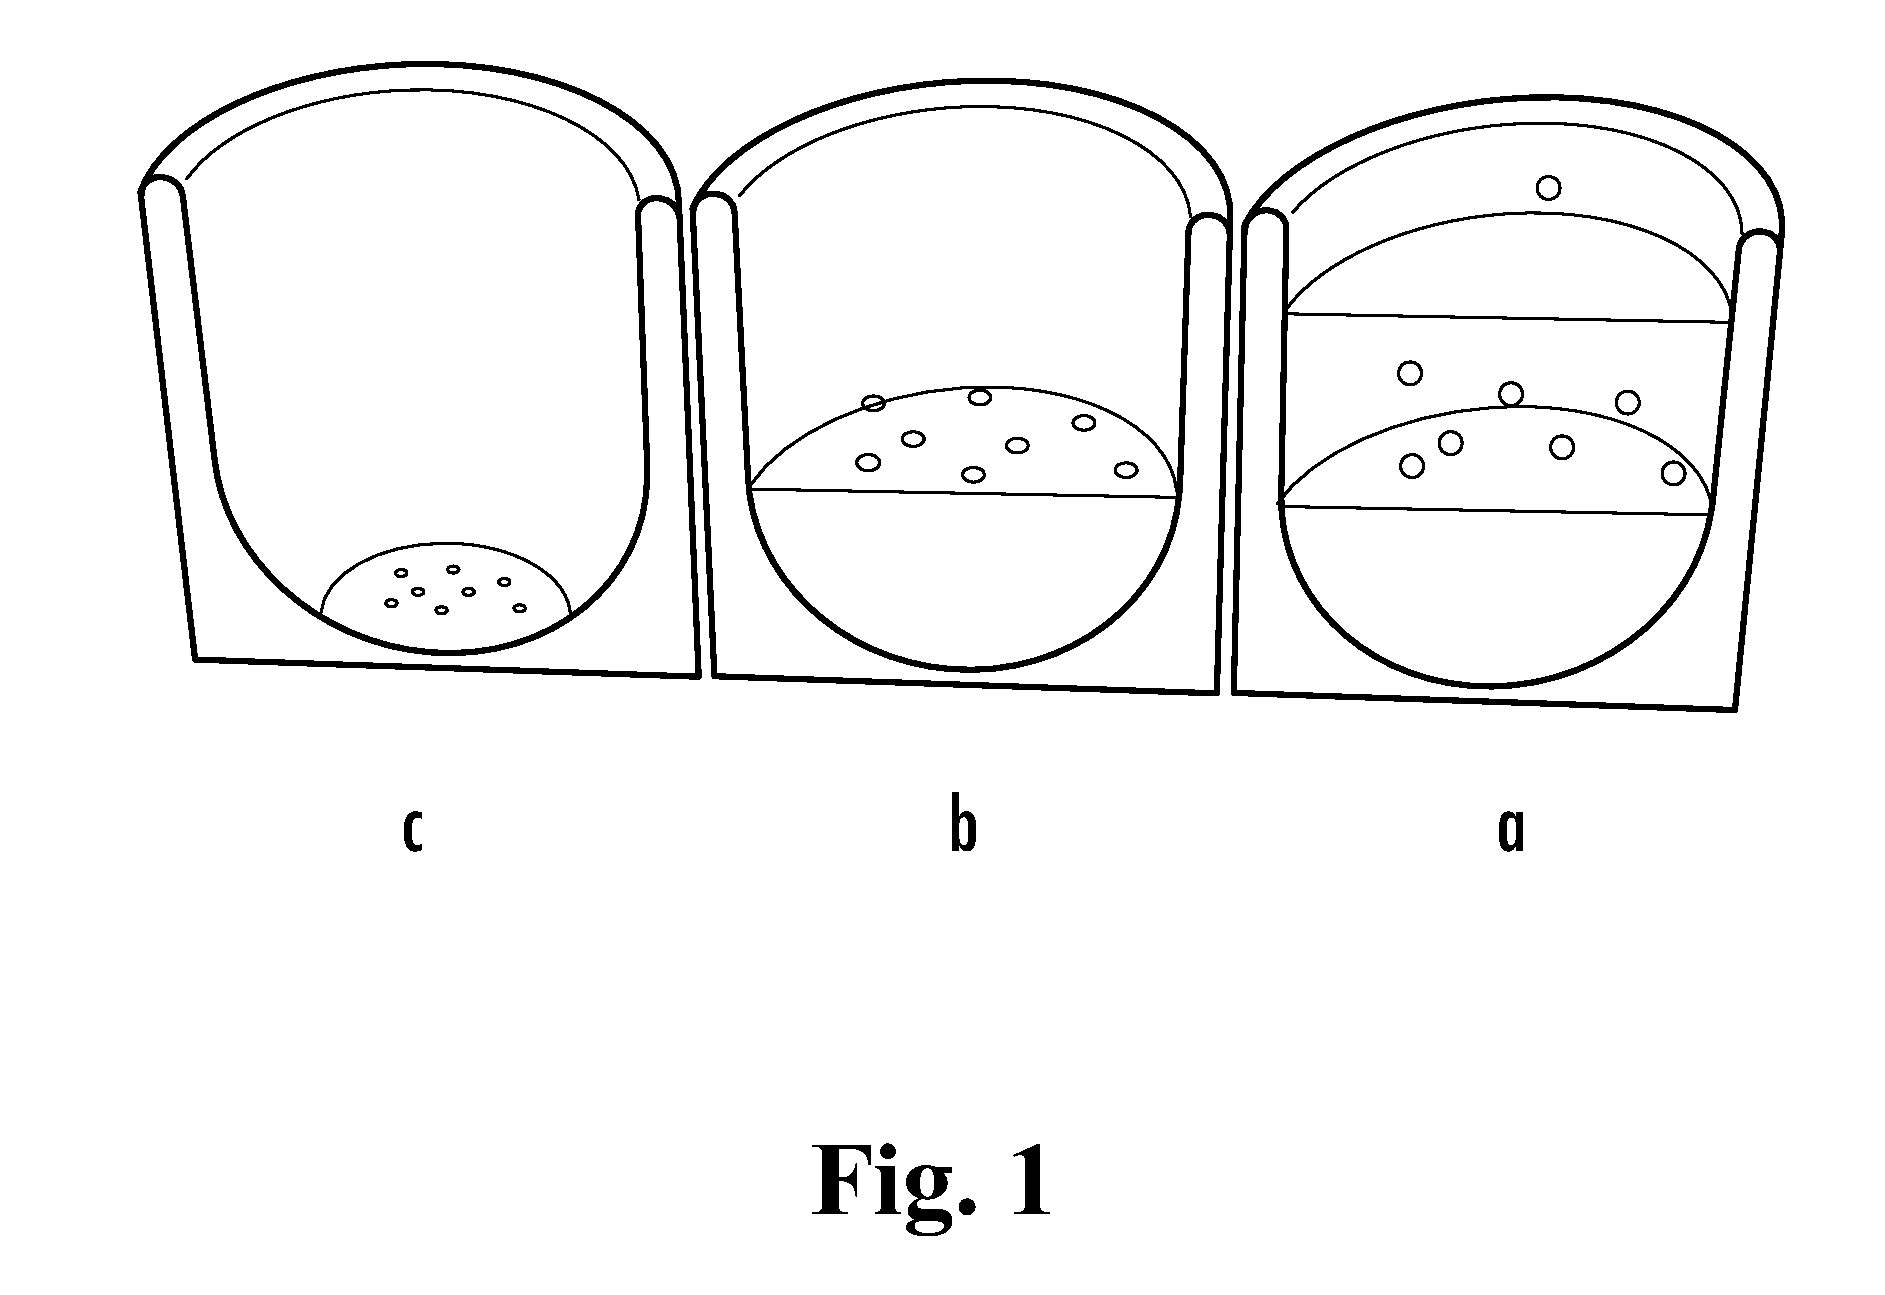 Loadable Polymeric Particles for Cosmetic and Reconstructive Tissue Augmentation Applications and Methods of Preparing and Using the Same